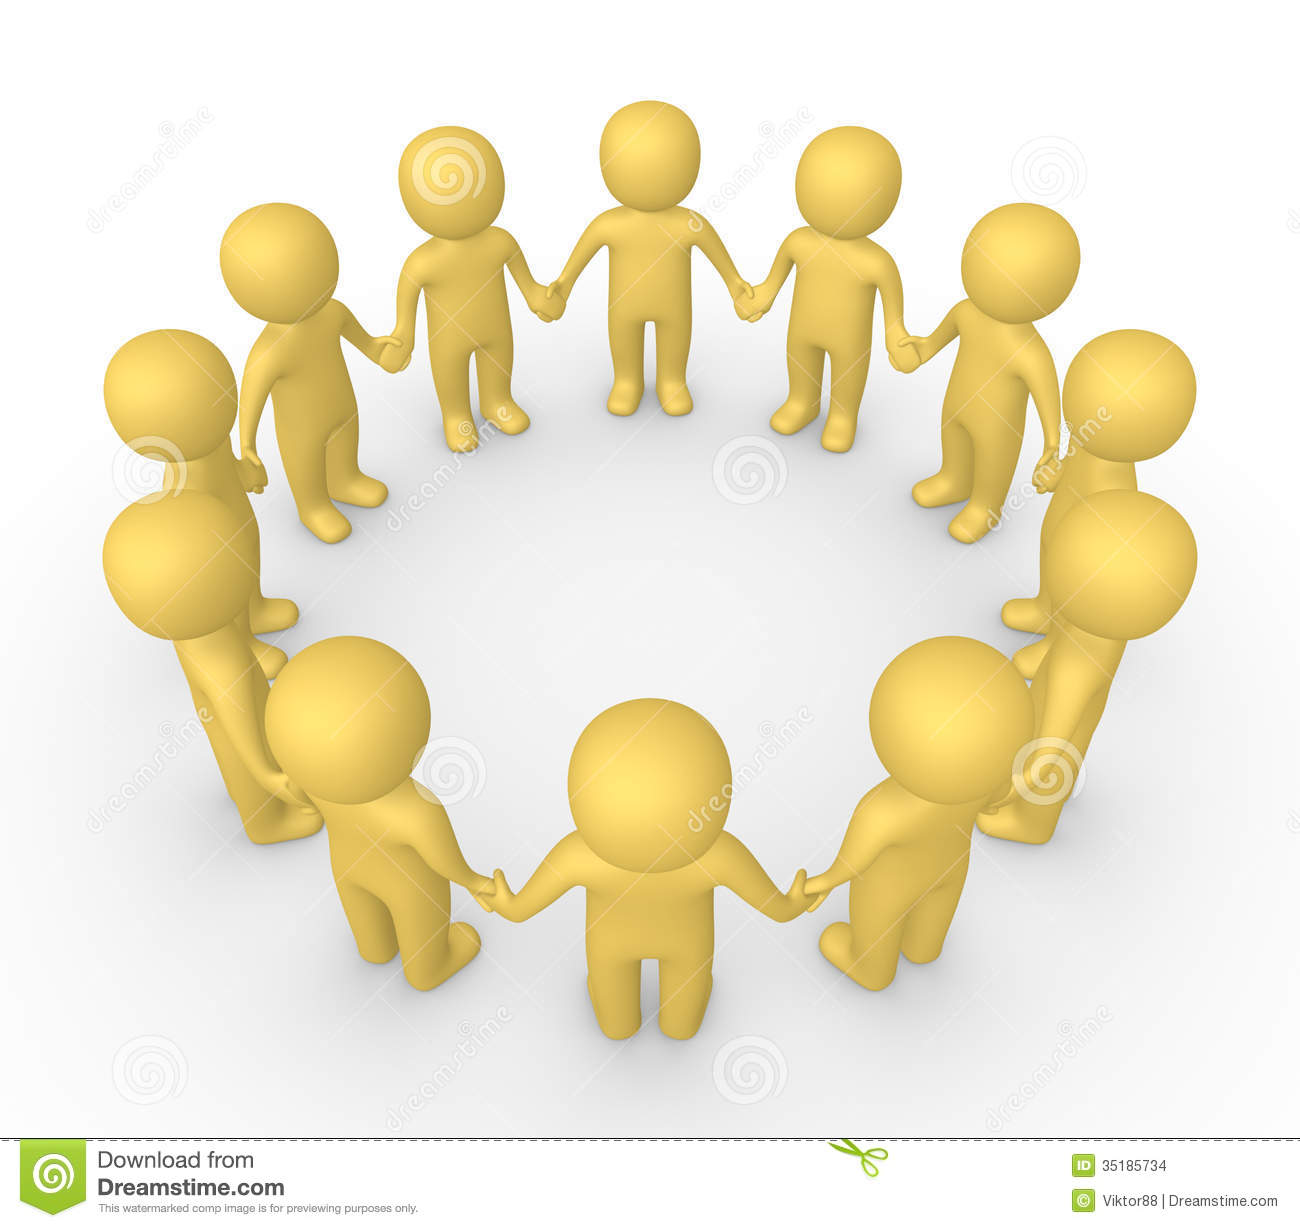 People Holding Hands In A Circle Clipart Circle And Holding Hands